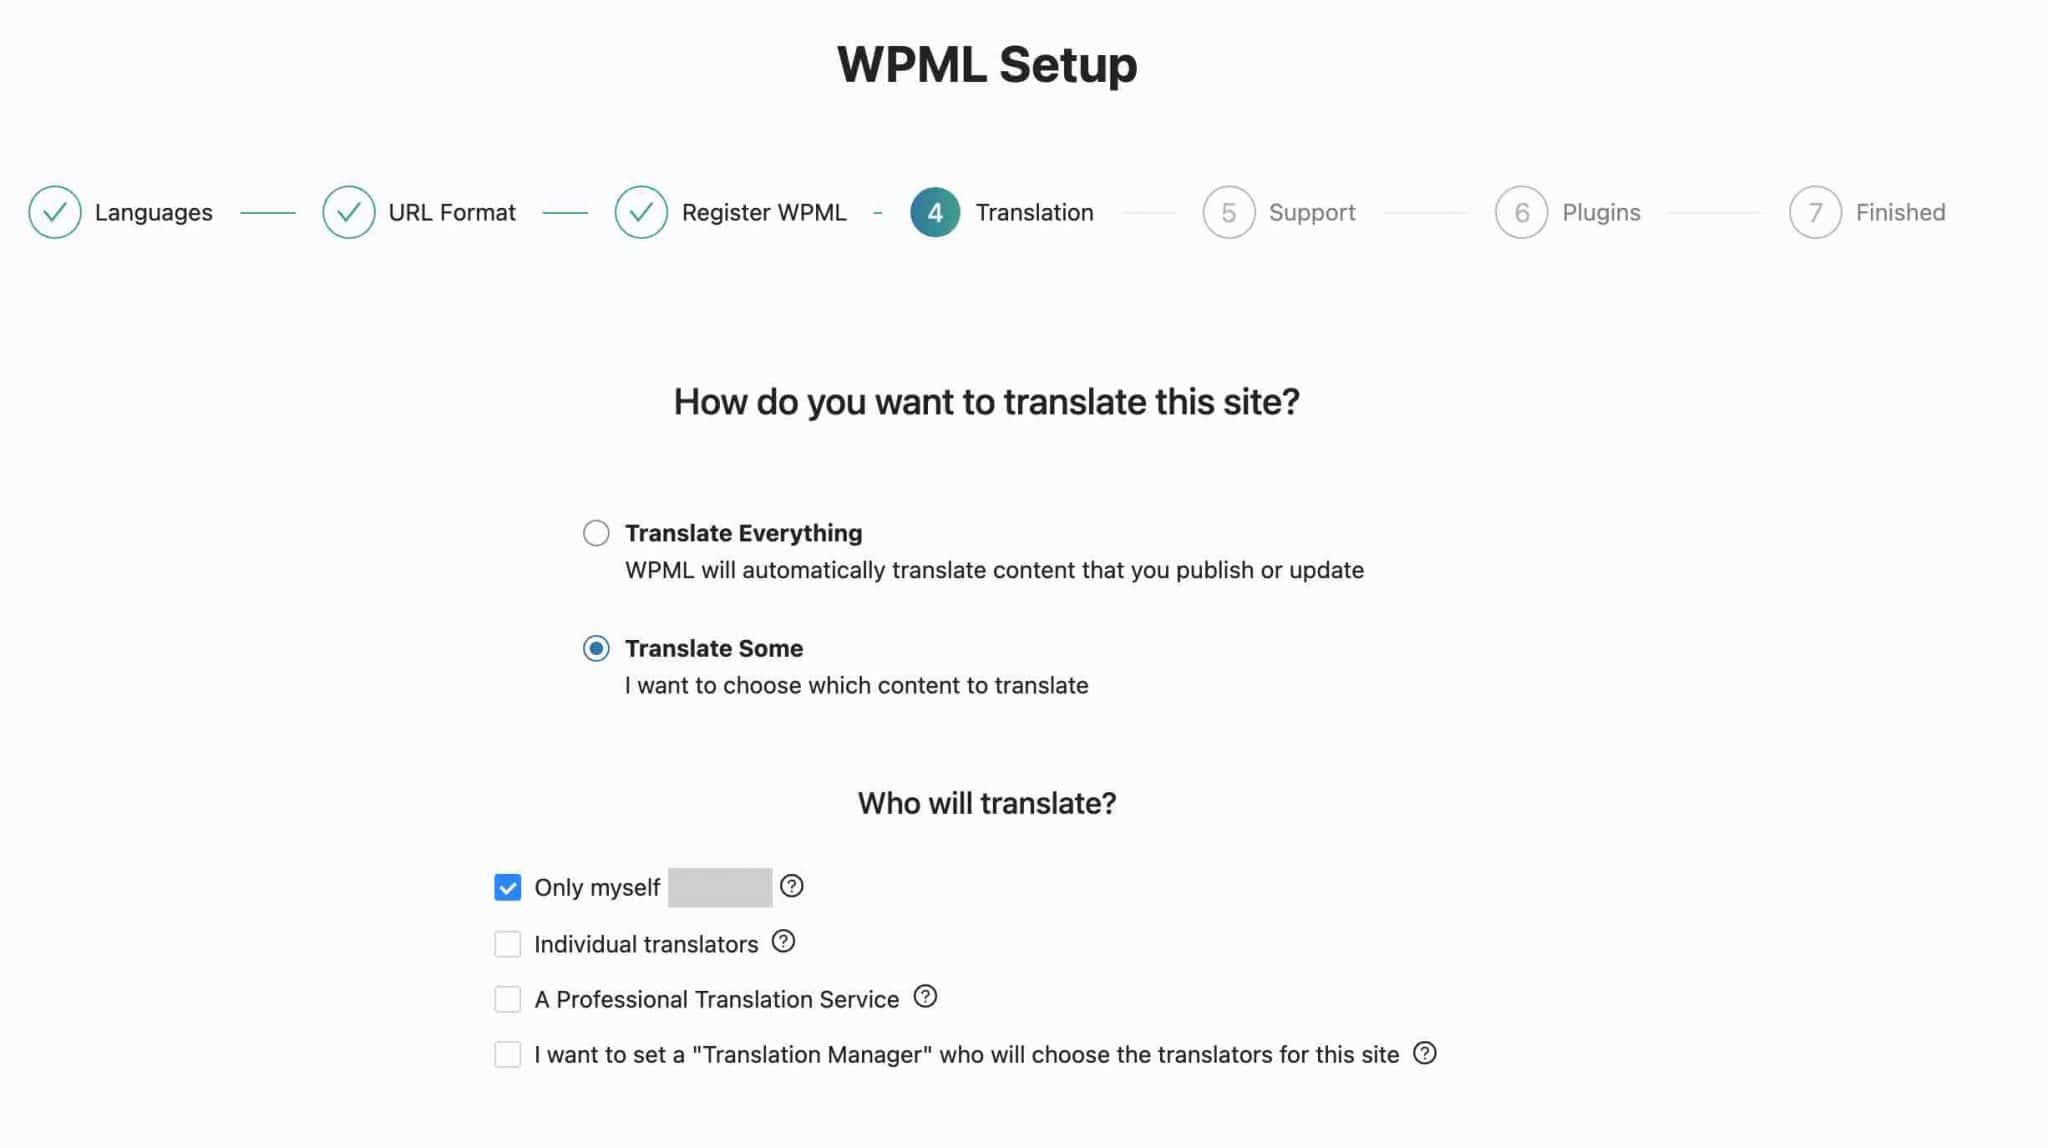 WPML offers different translation options.